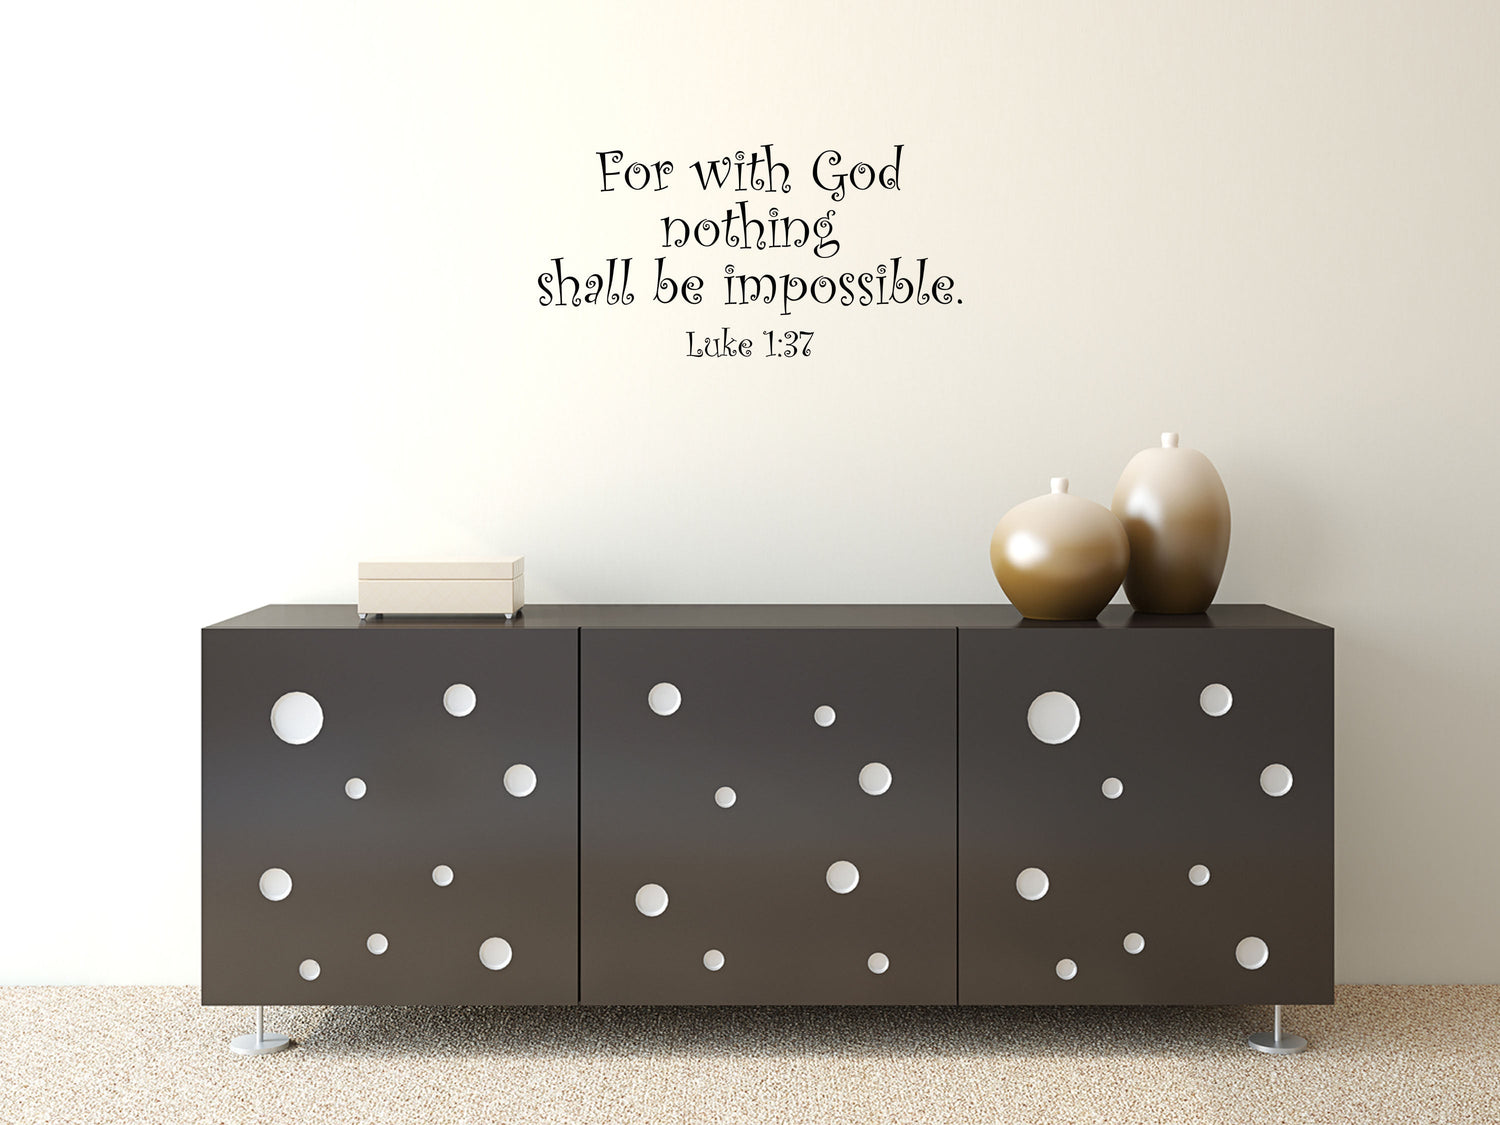 Luke 1:37 For With God Nothing Shall Be Impossible - Scripture Wall Decals Vinyl Wall Decal Inspirational Wall Signs 